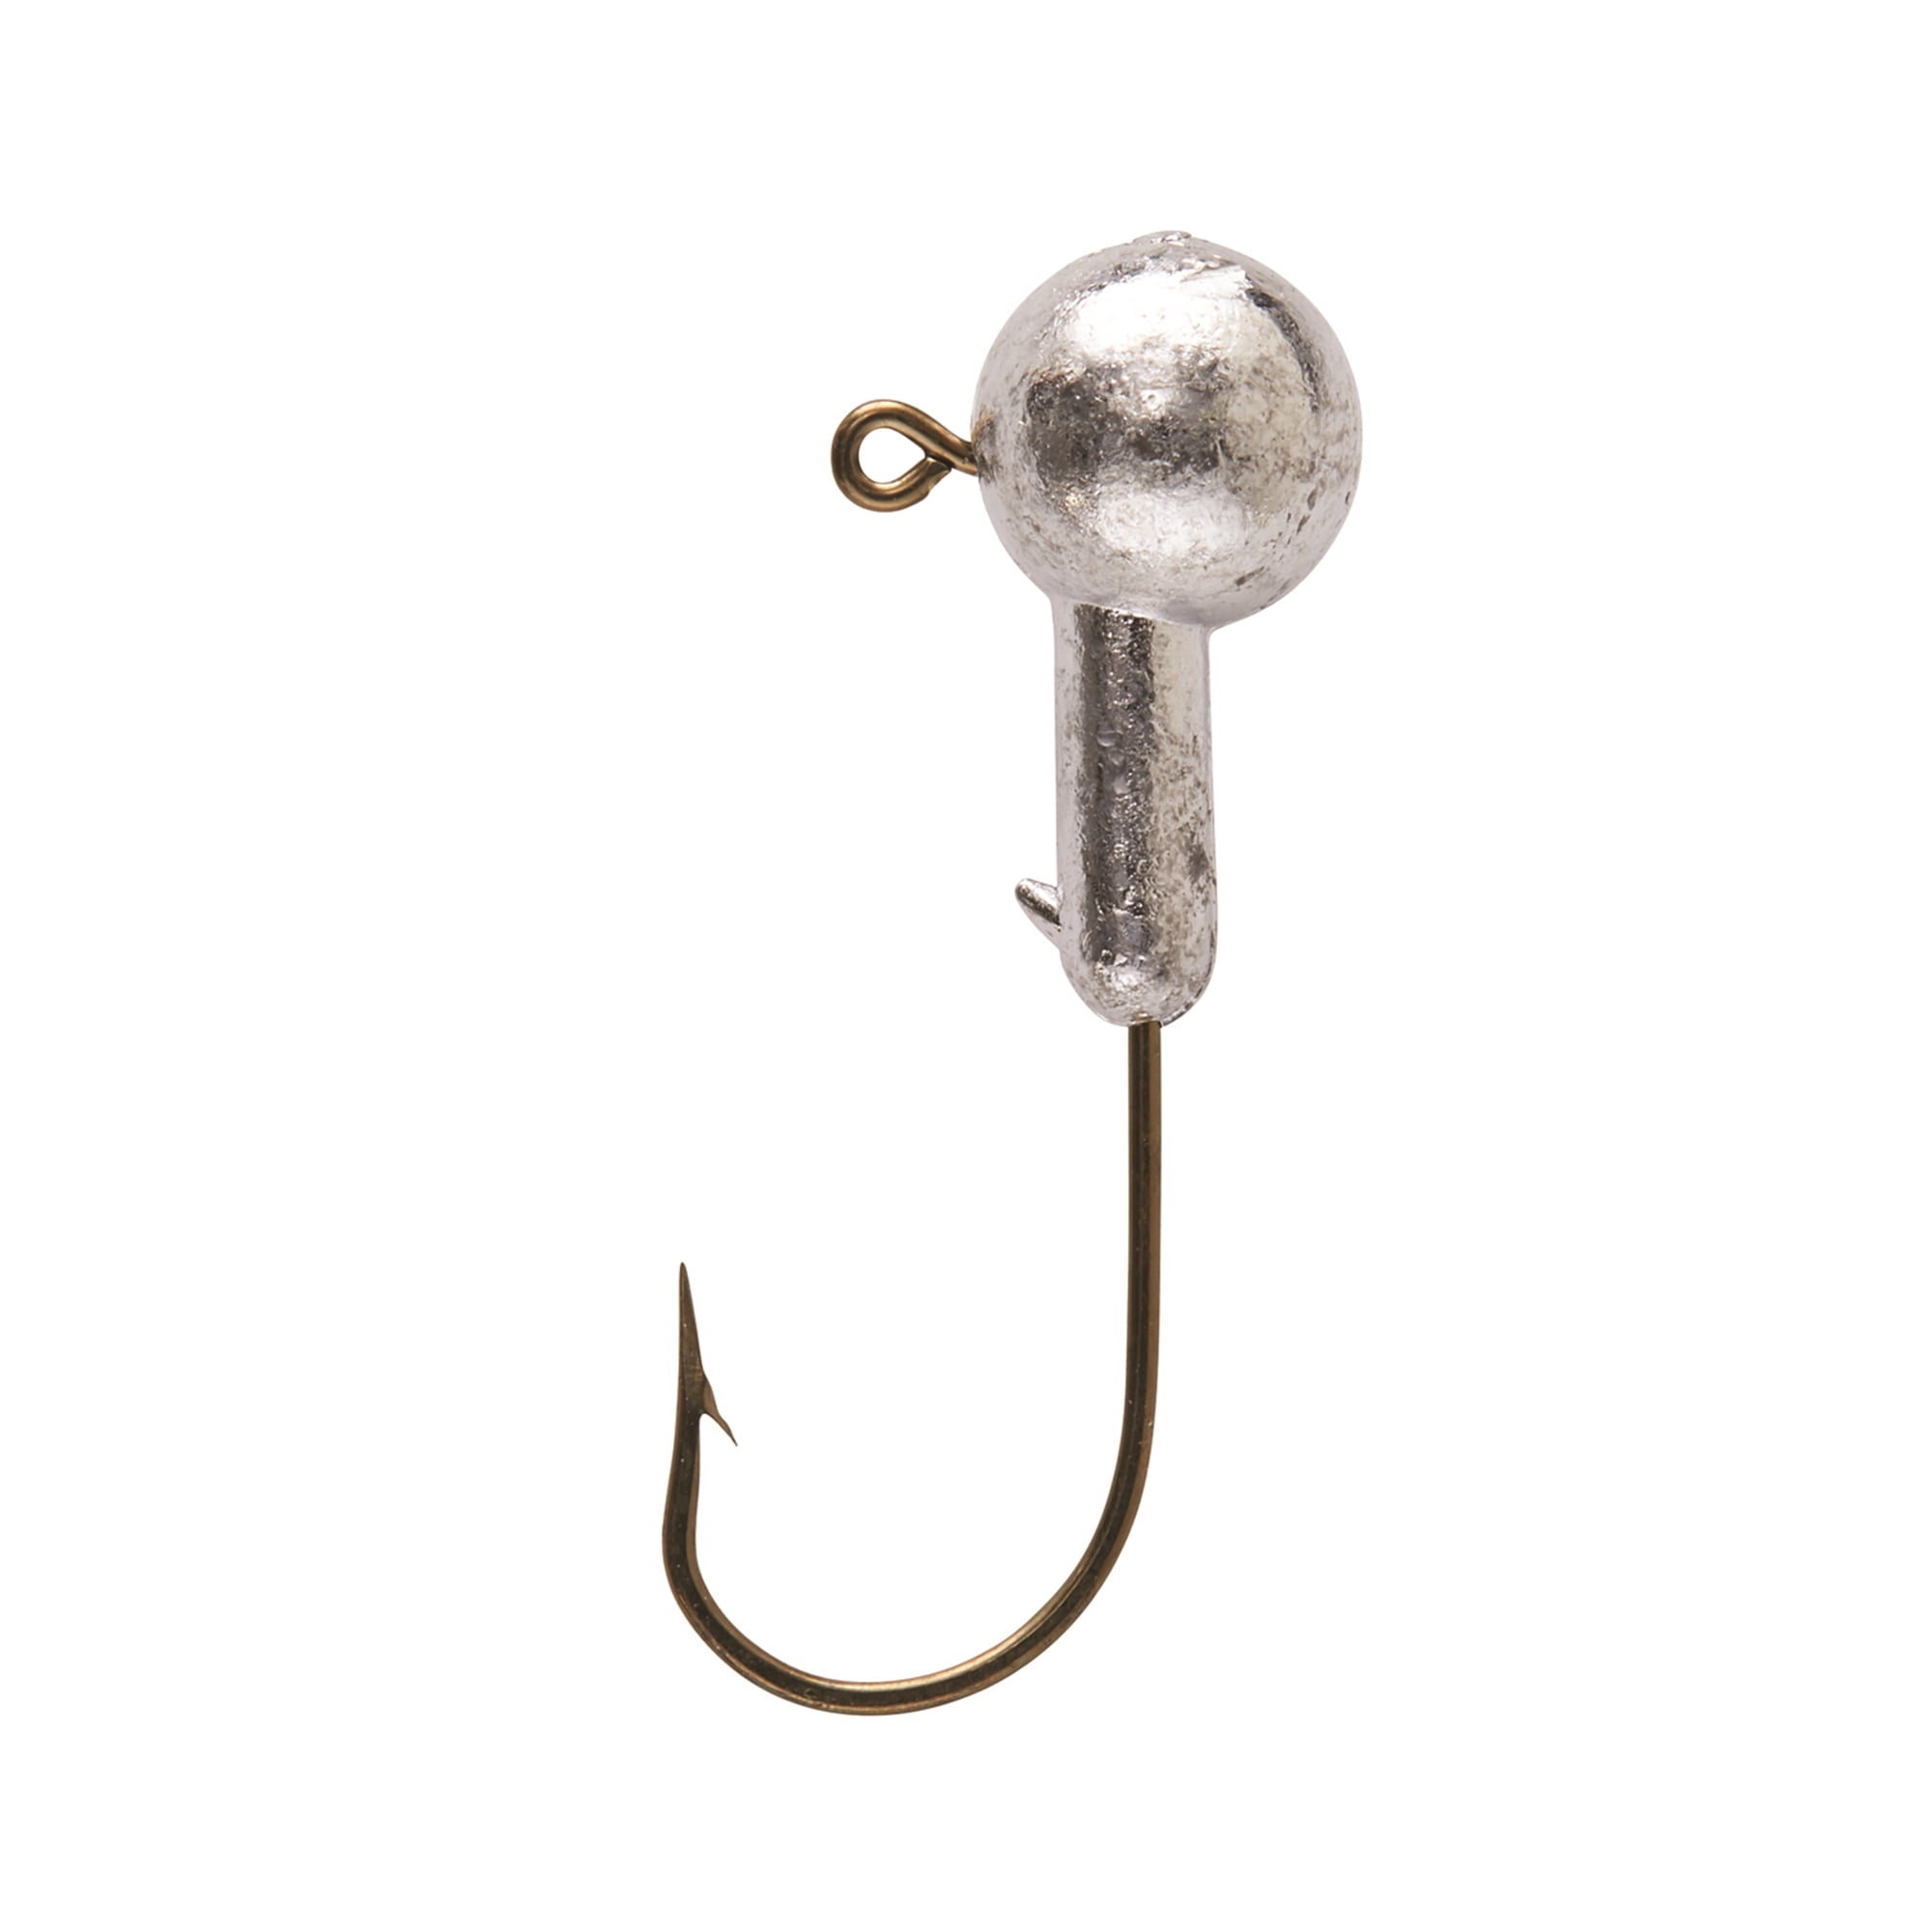 Eagle Claw Ball Head Fishing Jig, Unpainted with Bronze Hook, 1/8 oz., 10  Count 